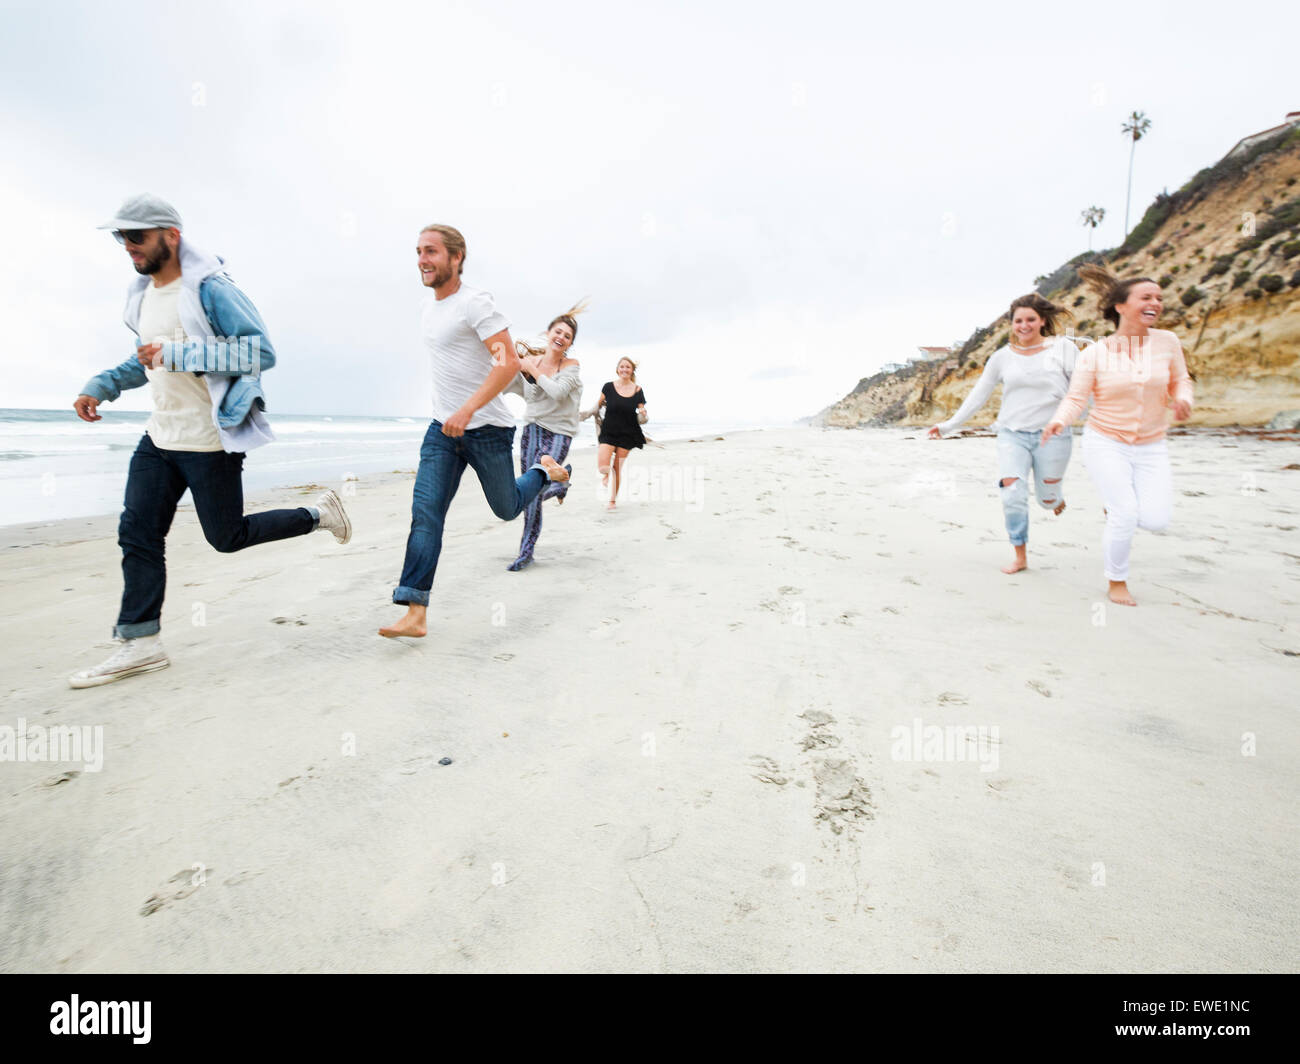 A group of young men and women running on a beach, having fun Stock Photo